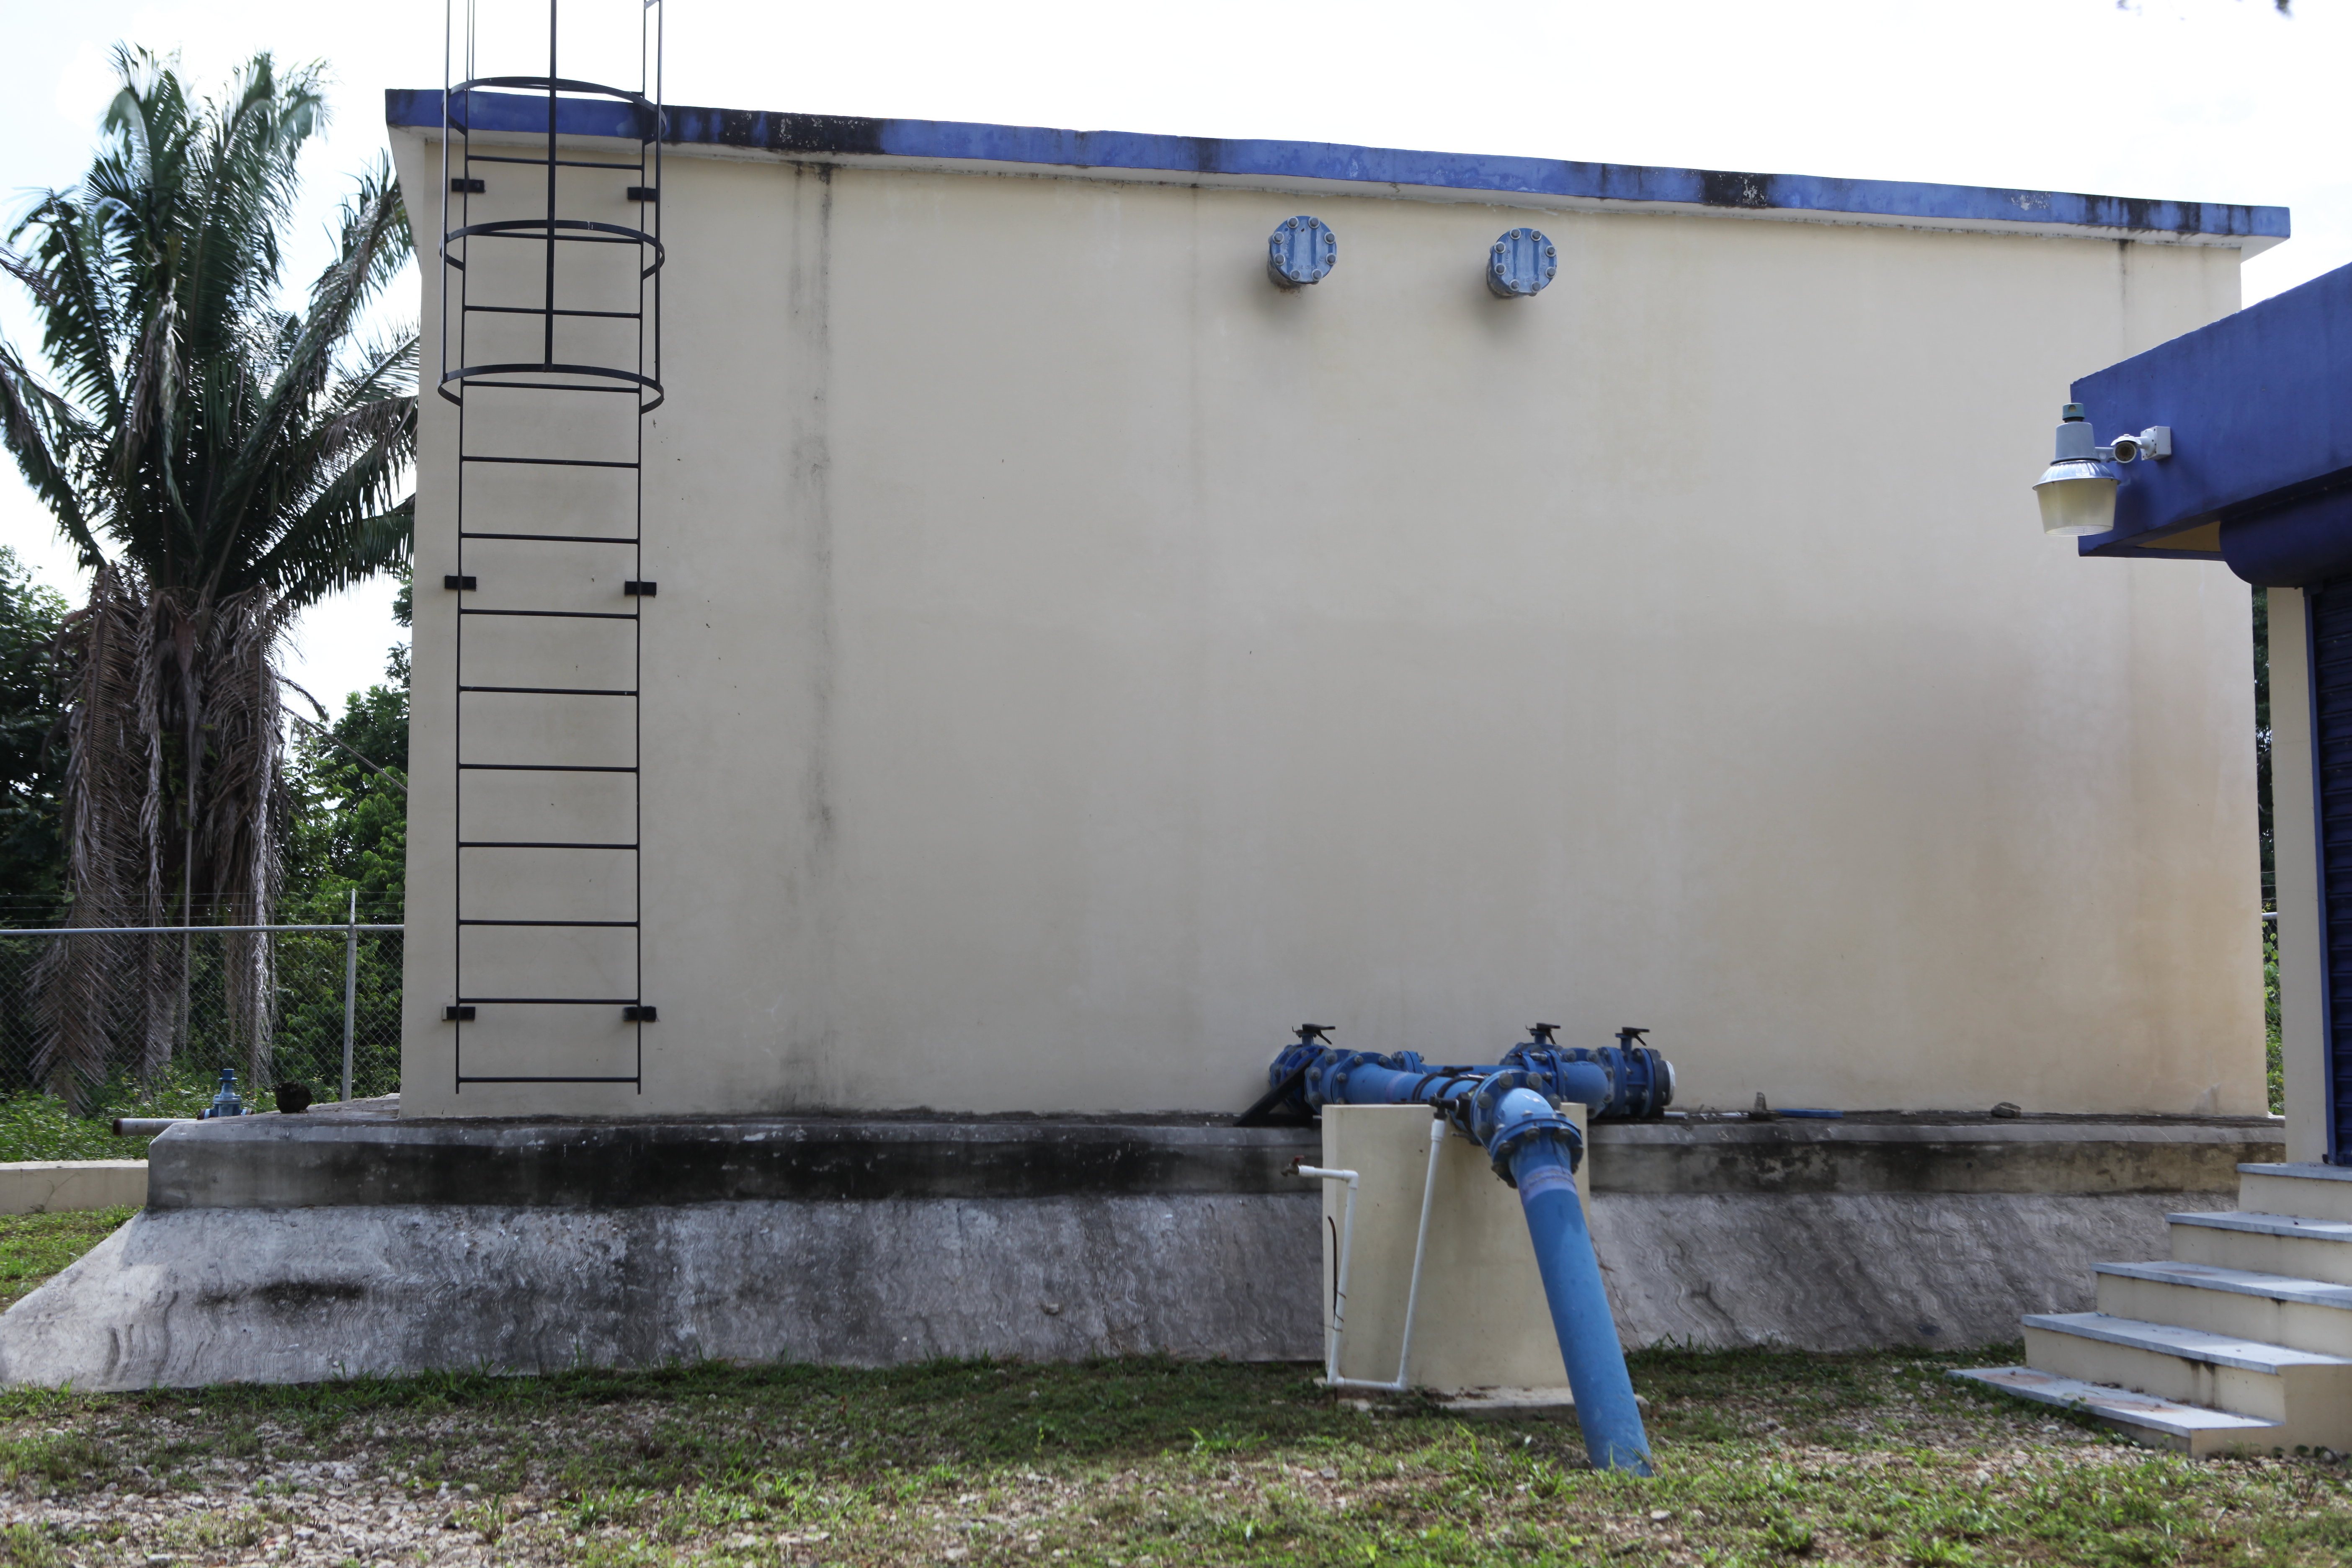 One of the water storage stations constructed as part of the project